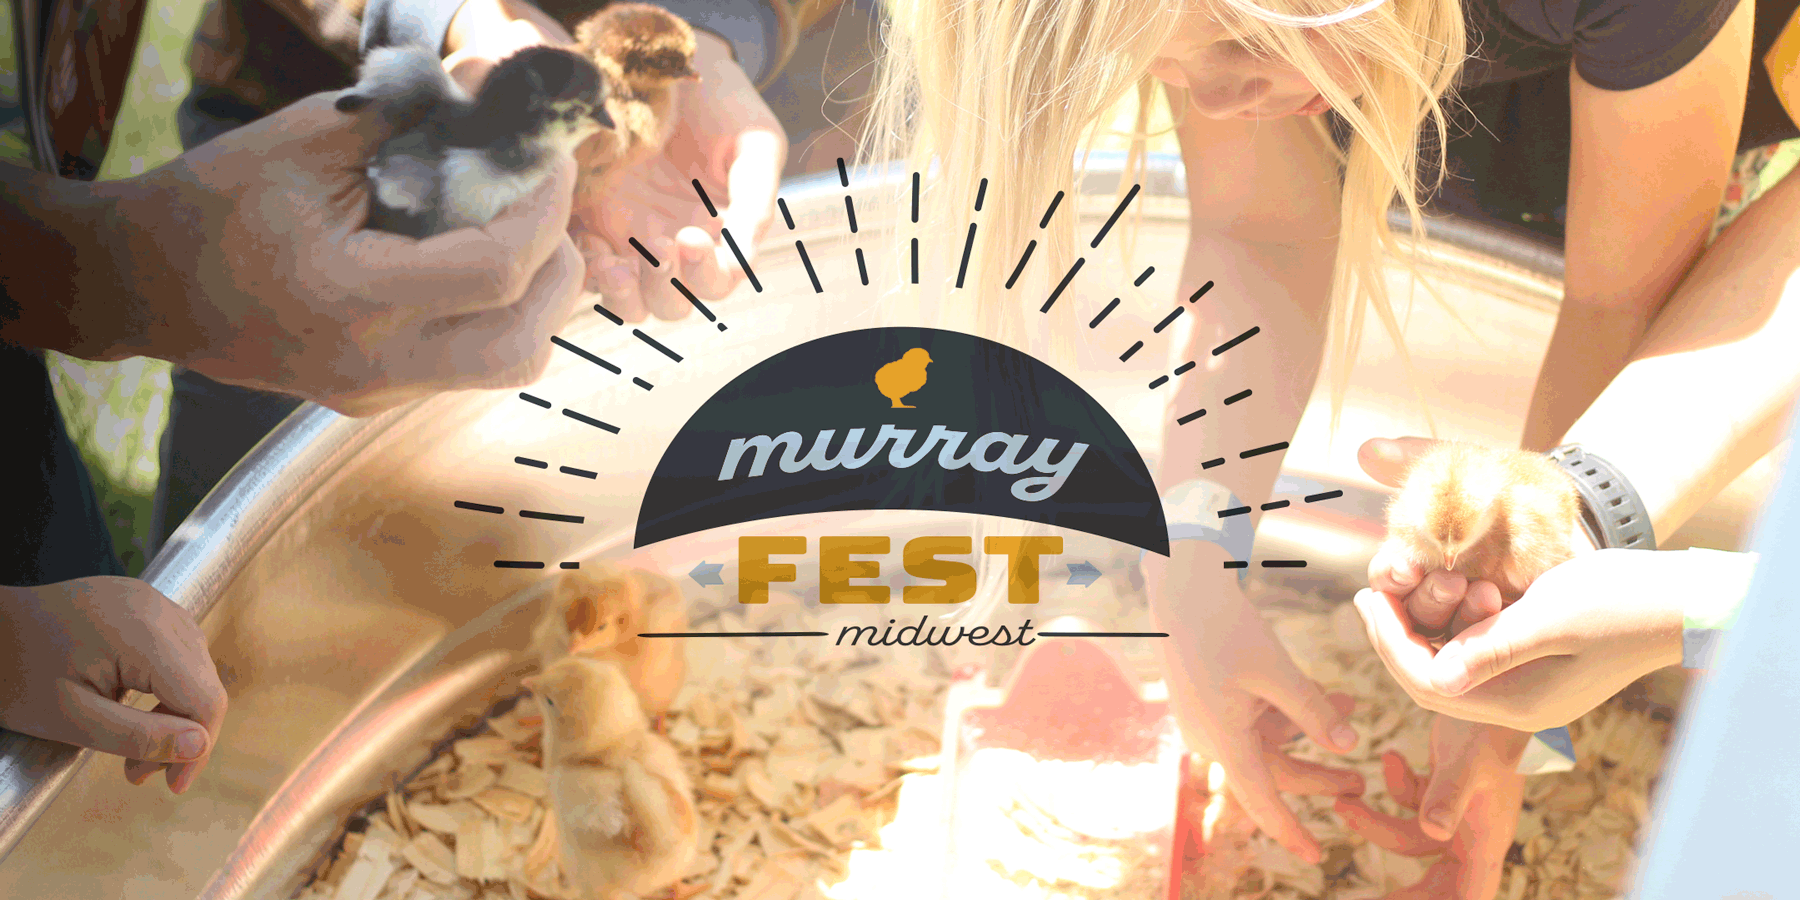 Murray Fest Midwest presented by Murray McMurray Hatchery